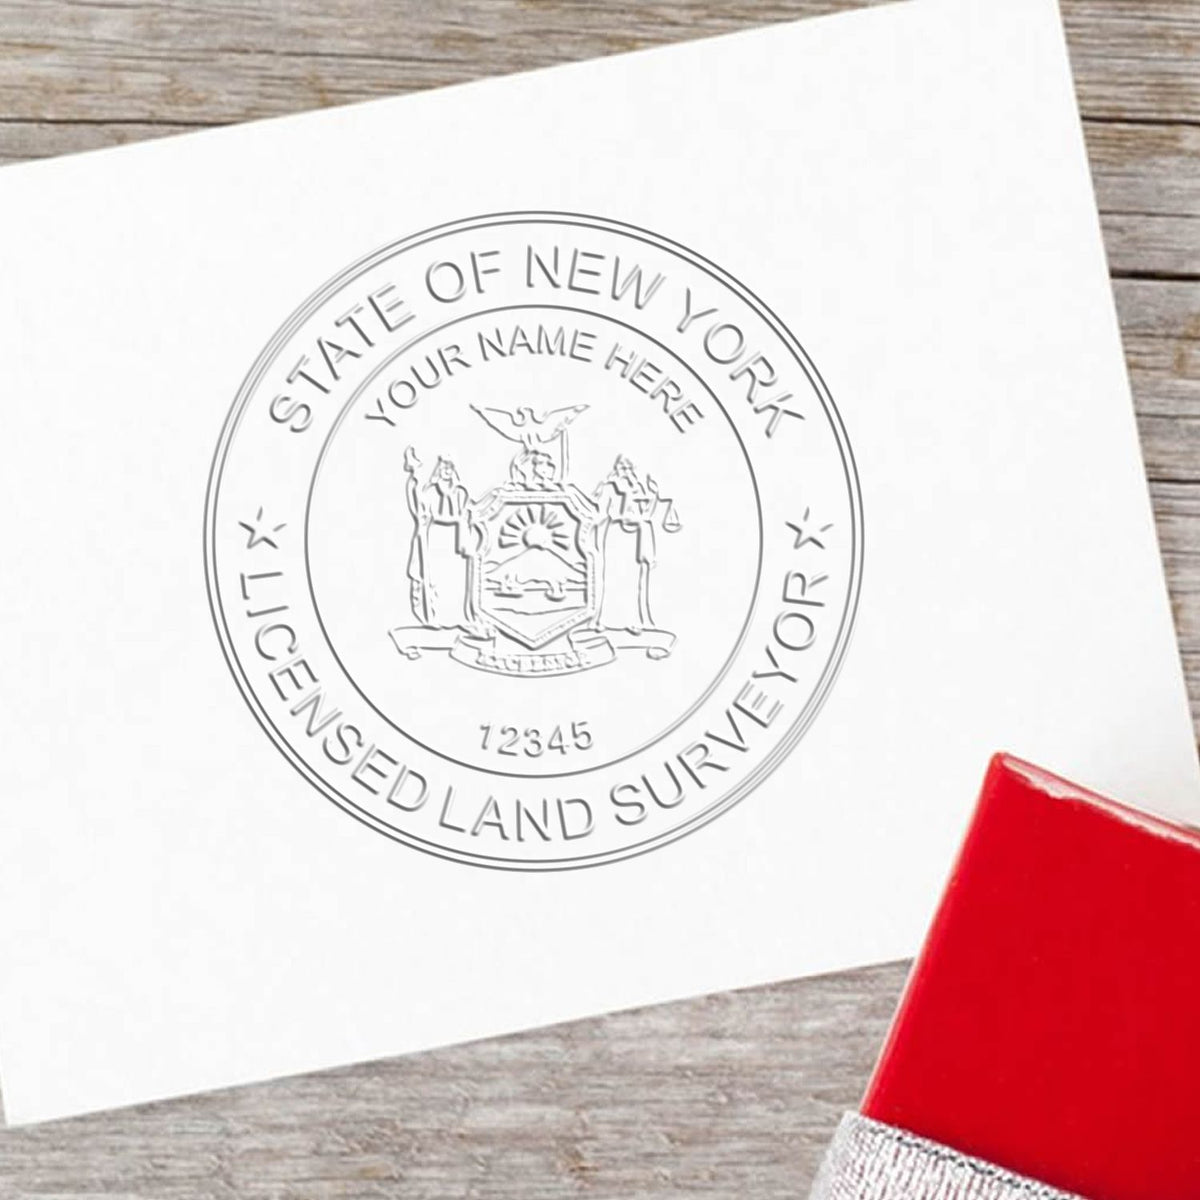 The Gift New York Land Surveyor Seal stamp impression comes to life with a crisp, detailed image stamped on paper - showcasing true professional quality.